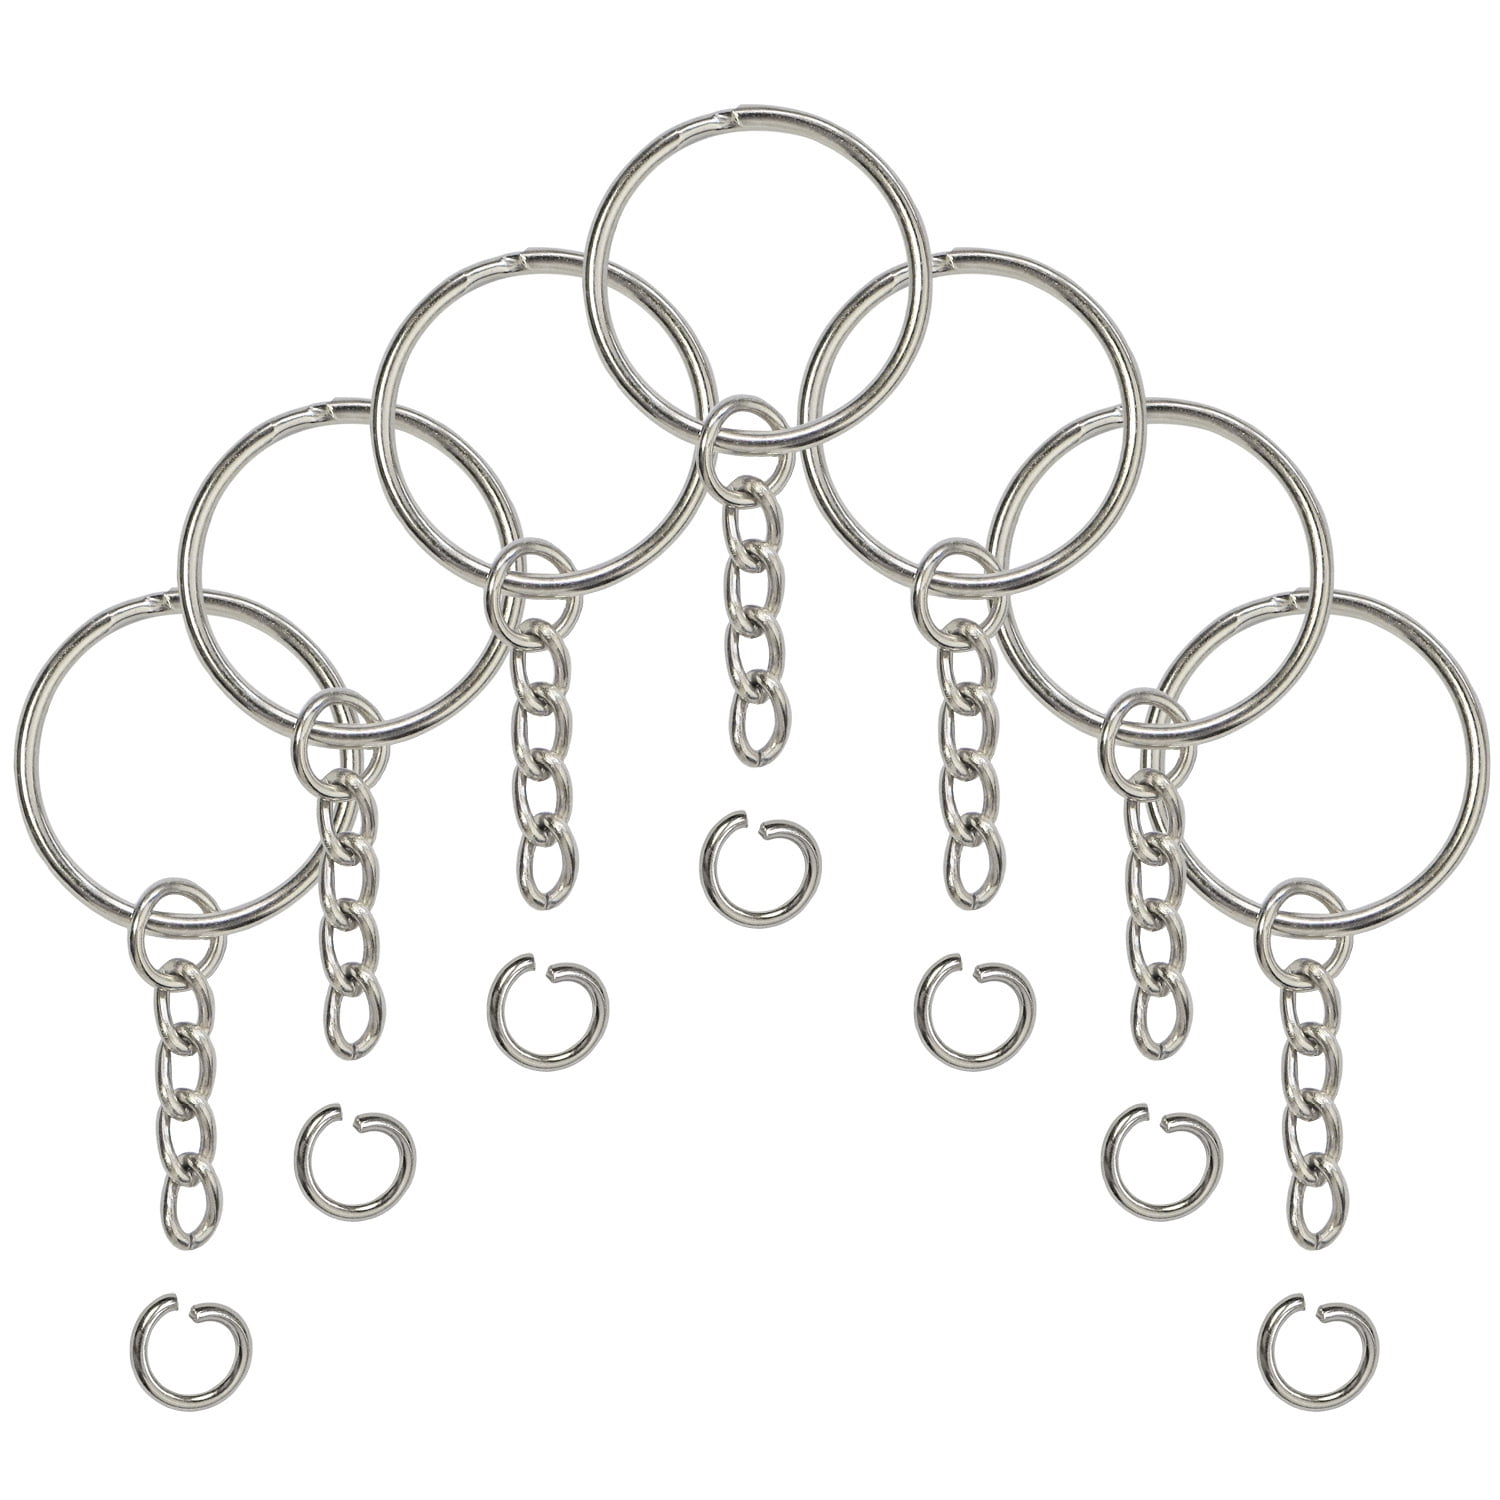 FIVE Silver Plated Heavy Duty Smooth Key Ring Split Rings Findings Jump Rings 